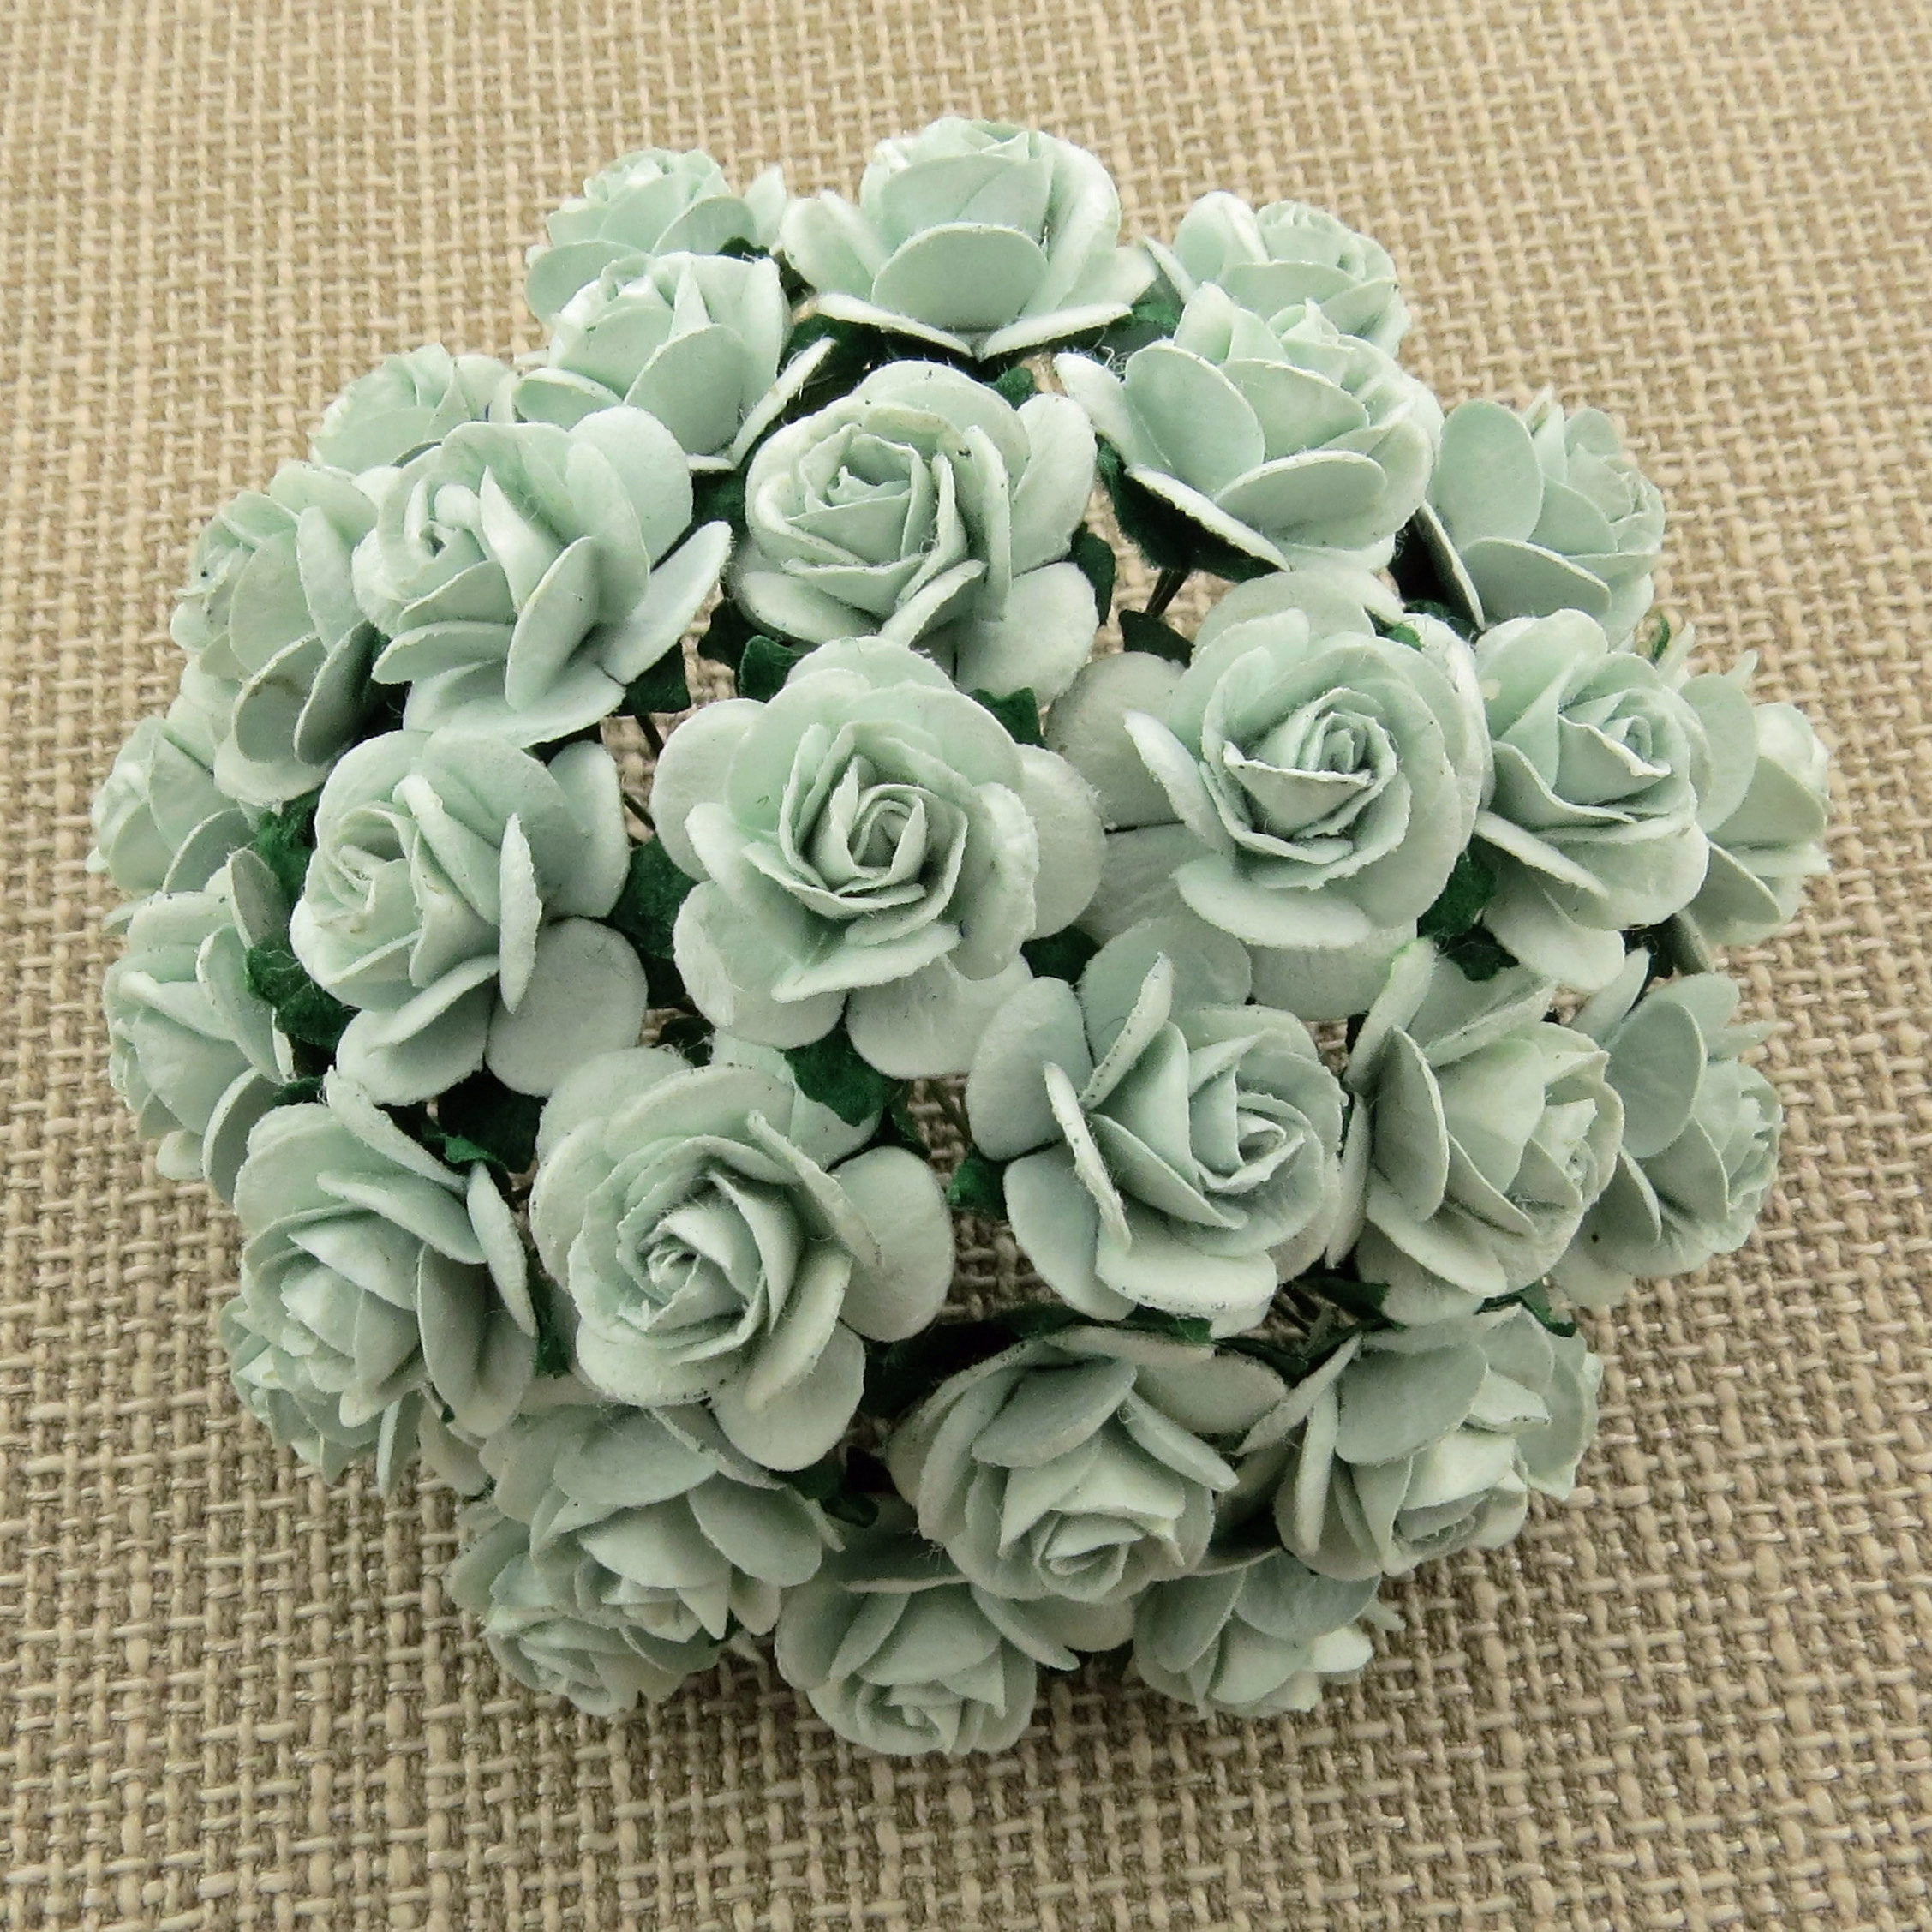 100 PALE BLUE MULBERRY PAPER OPEN ROSES